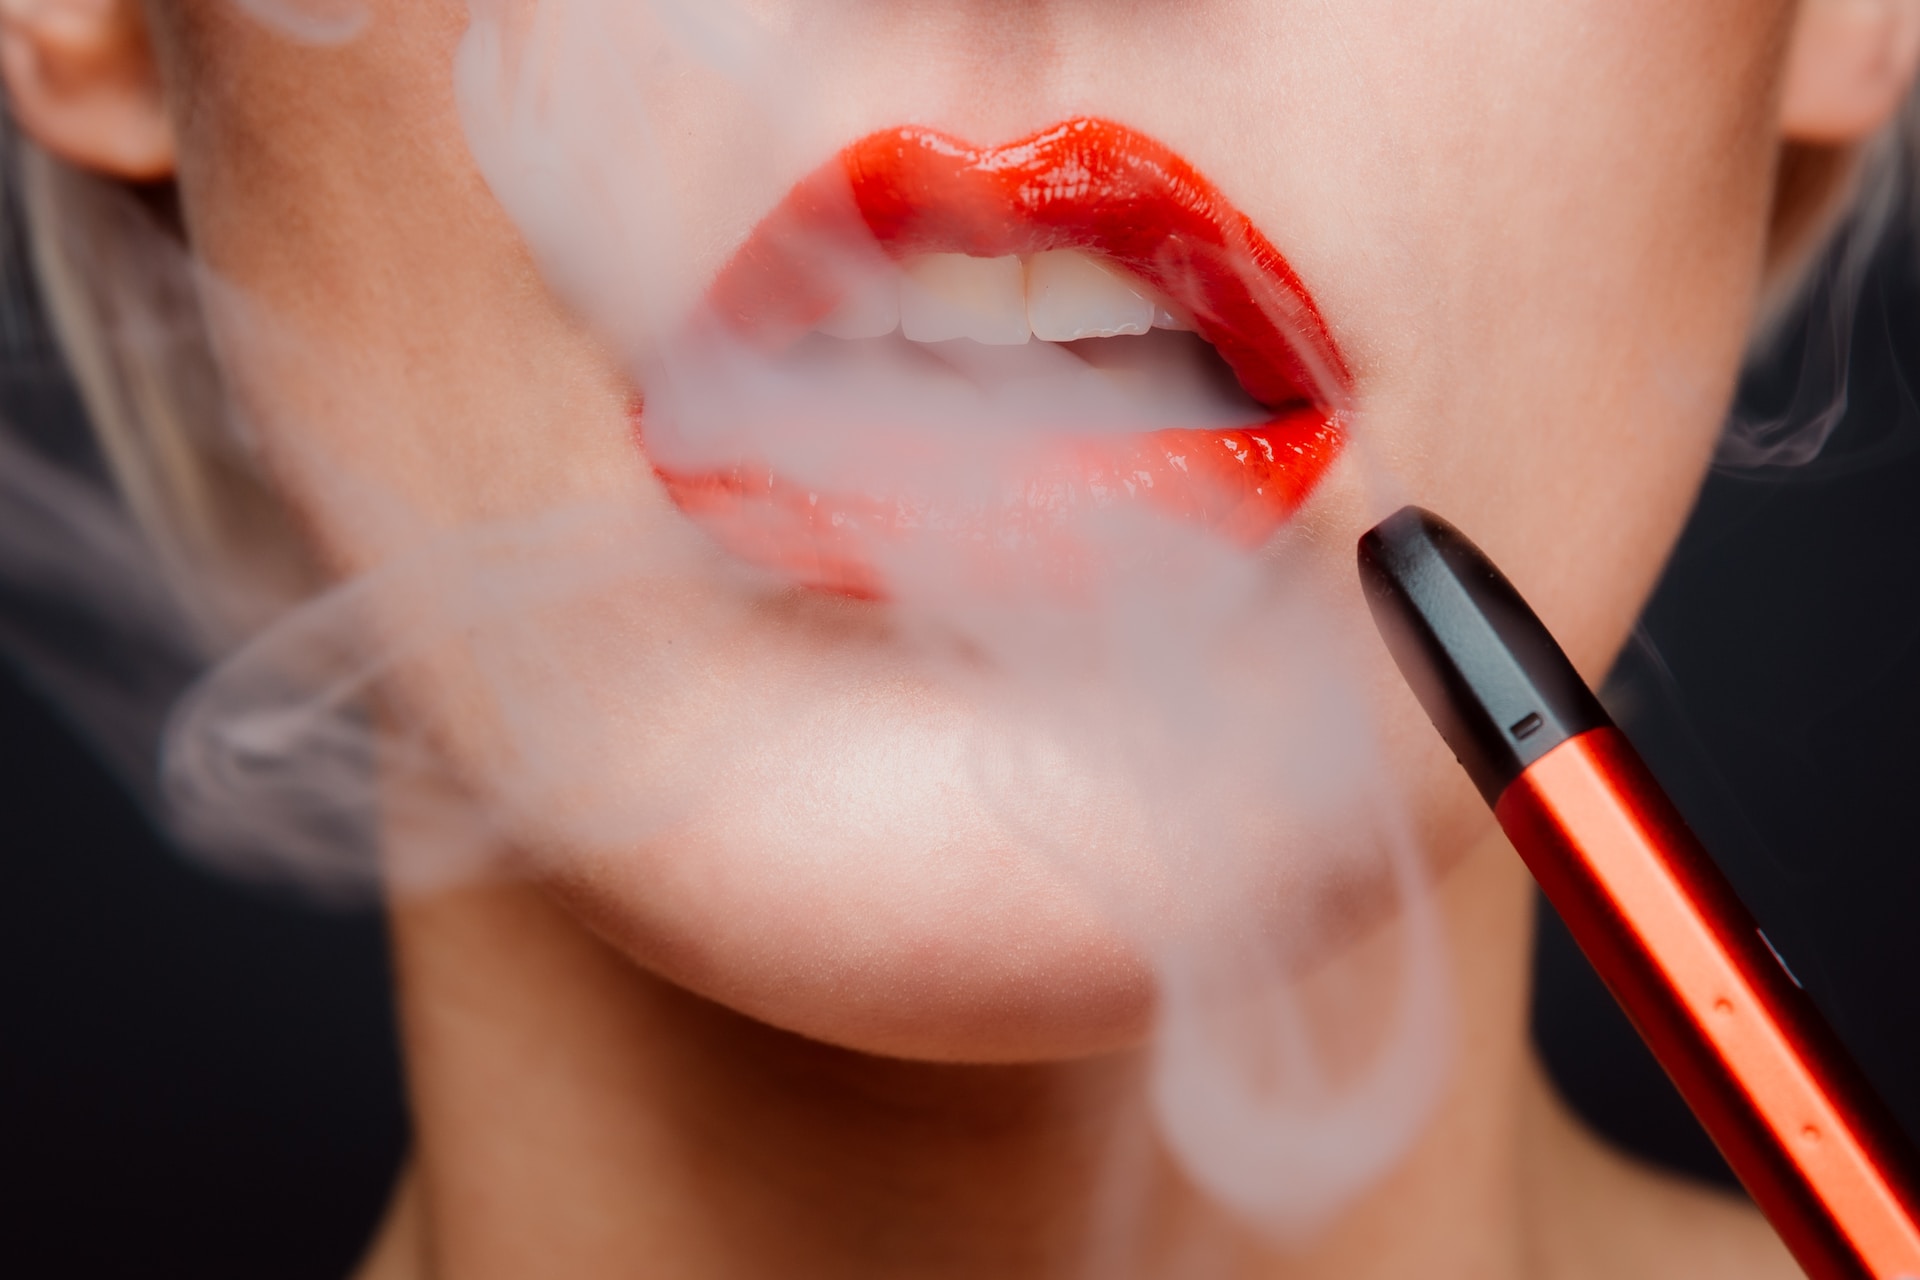 Woman with red lips uses a vape